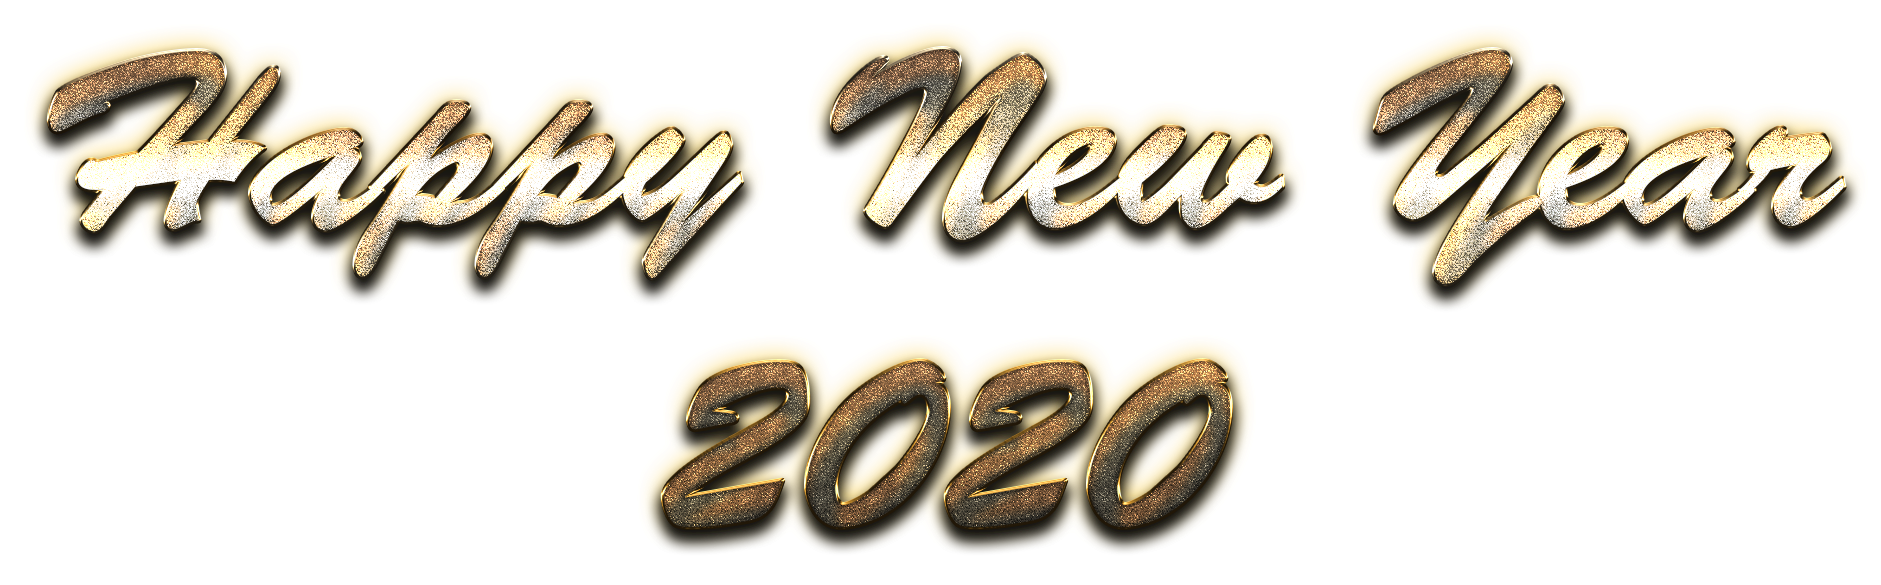 Happy New Year 2020 PNG Download Image